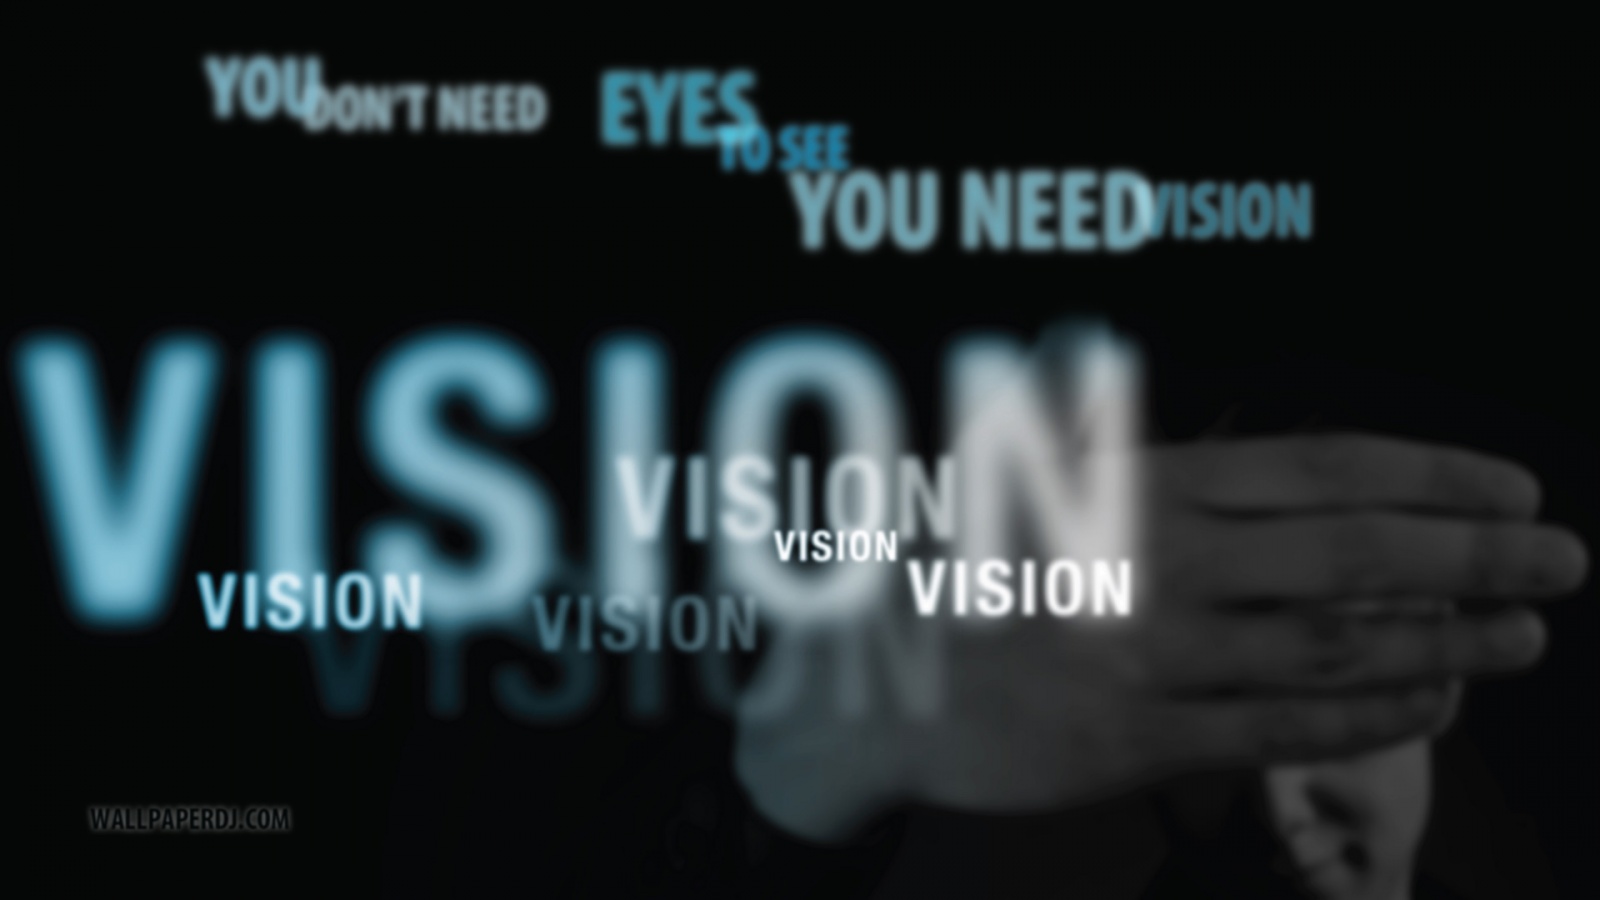 You Need Vision Wallpaper Music And Dance